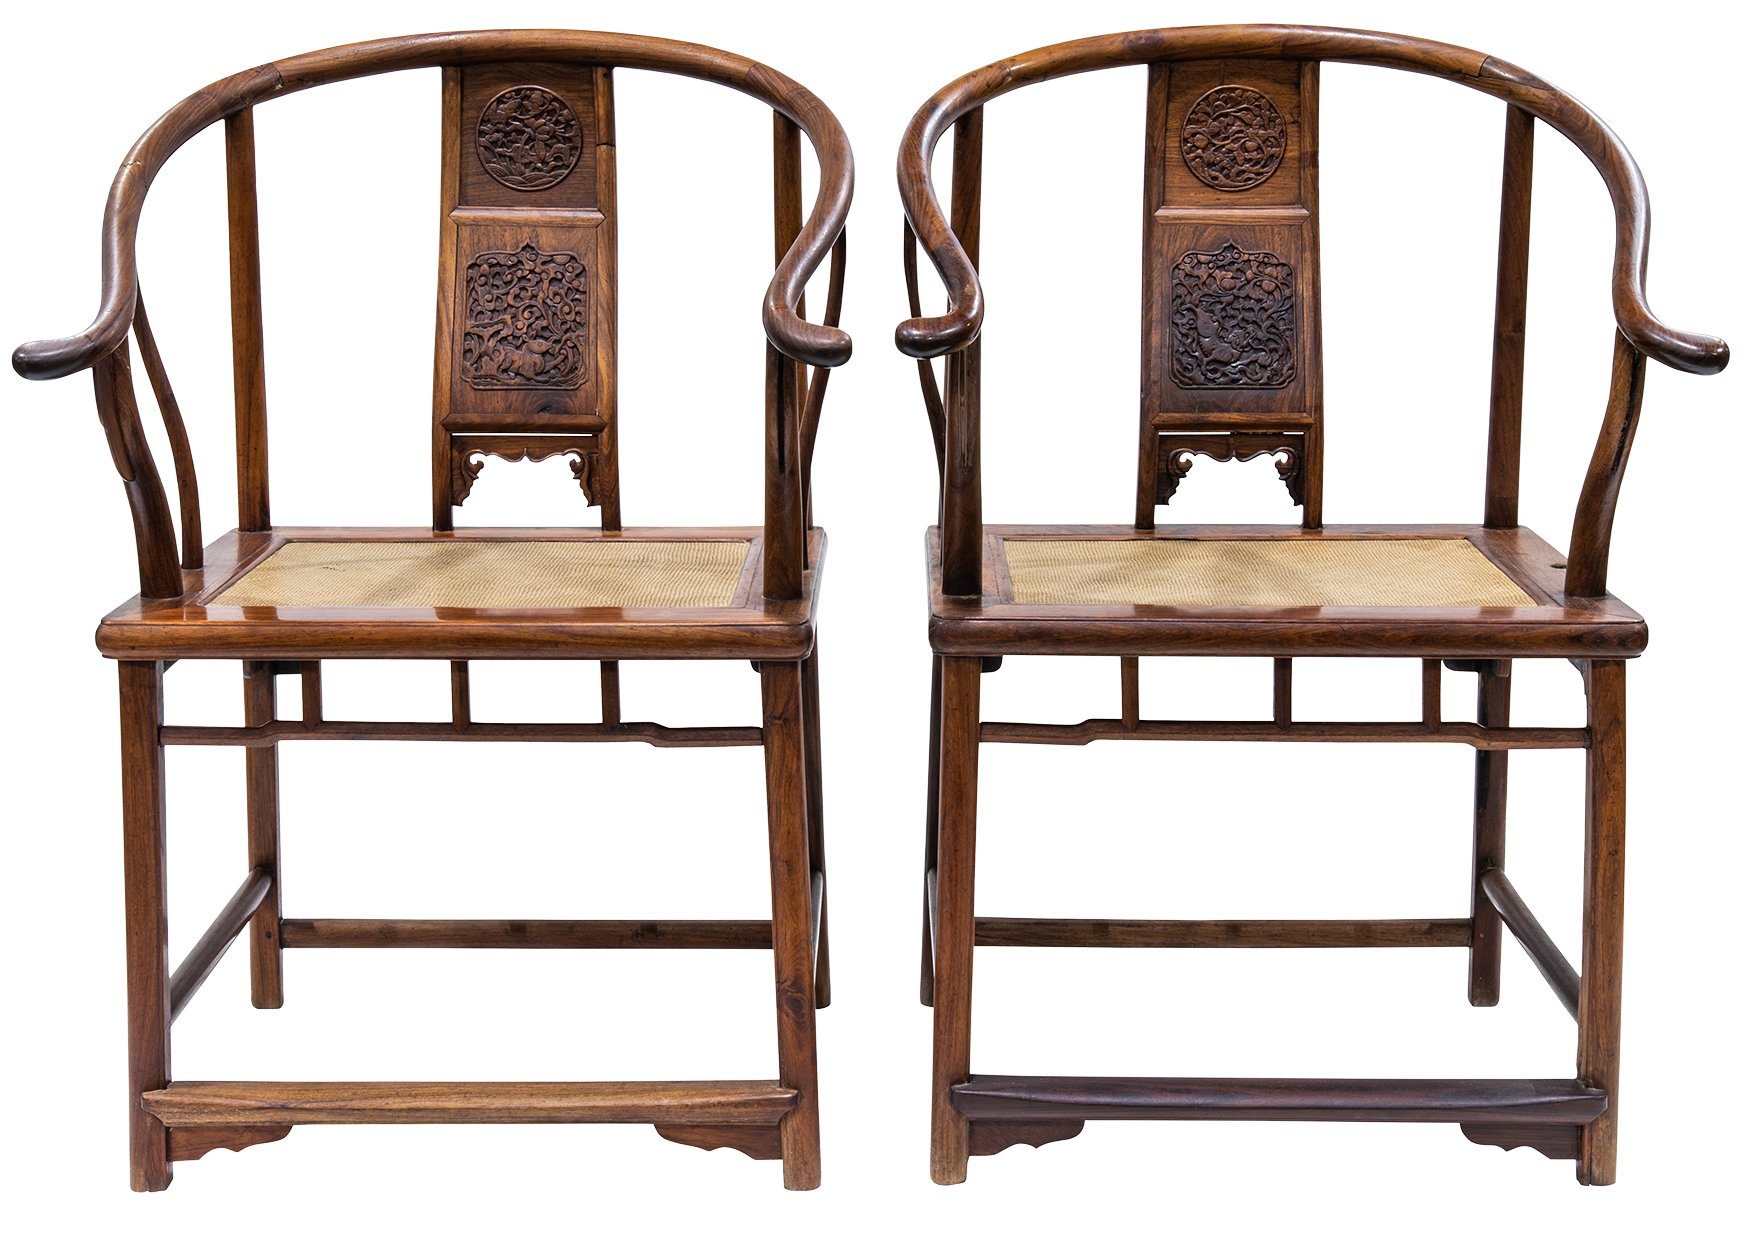 Pair of Chinese huanghuali horseshoe-back armchairs.Sold: $200,000